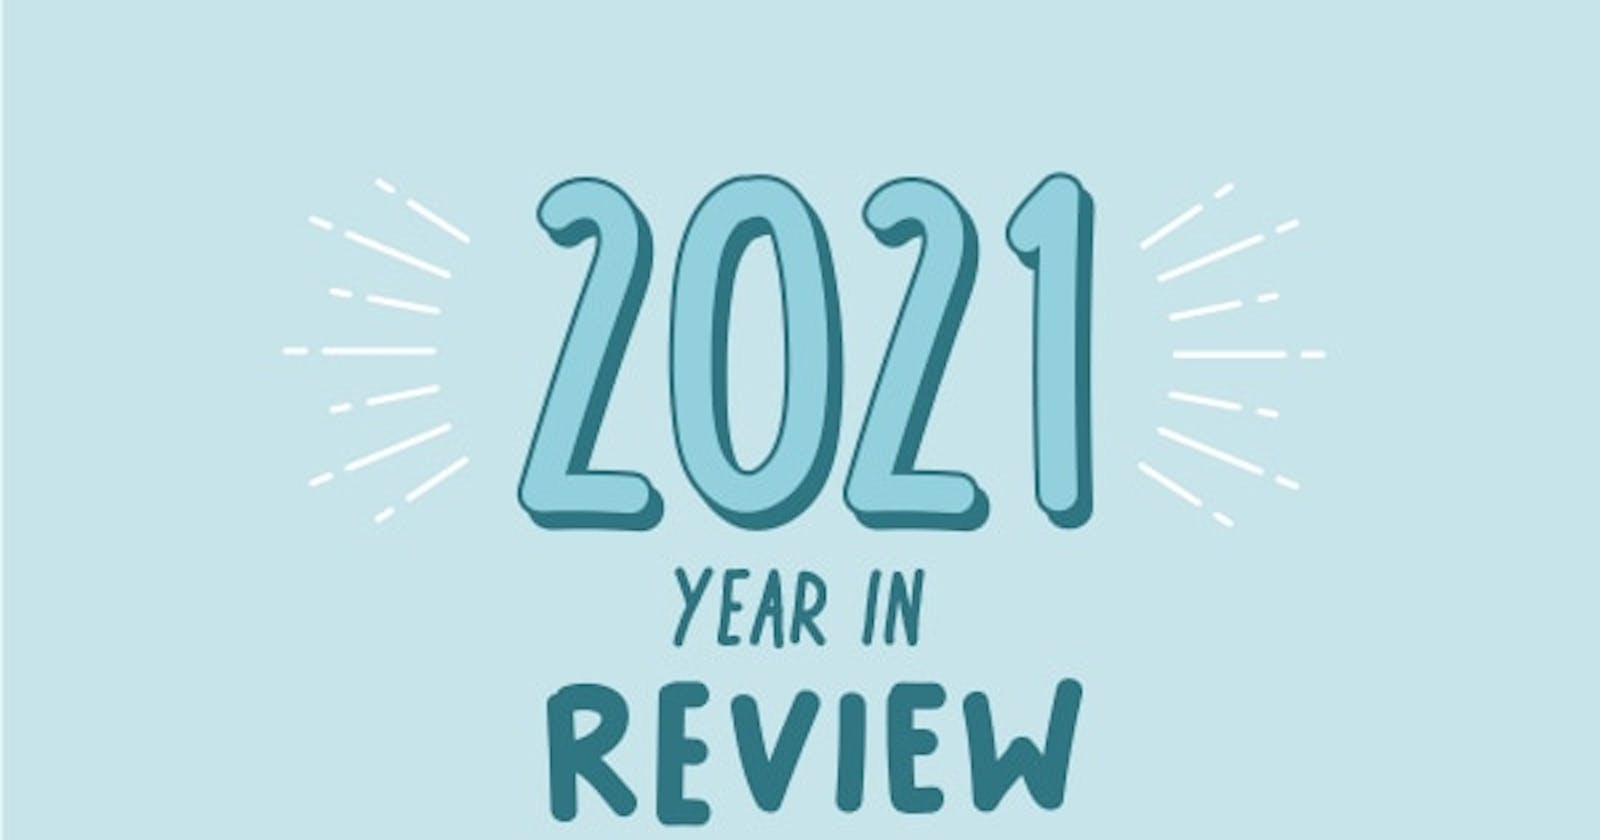 My 2021 in Review: The Good, The Bad & The Ugly